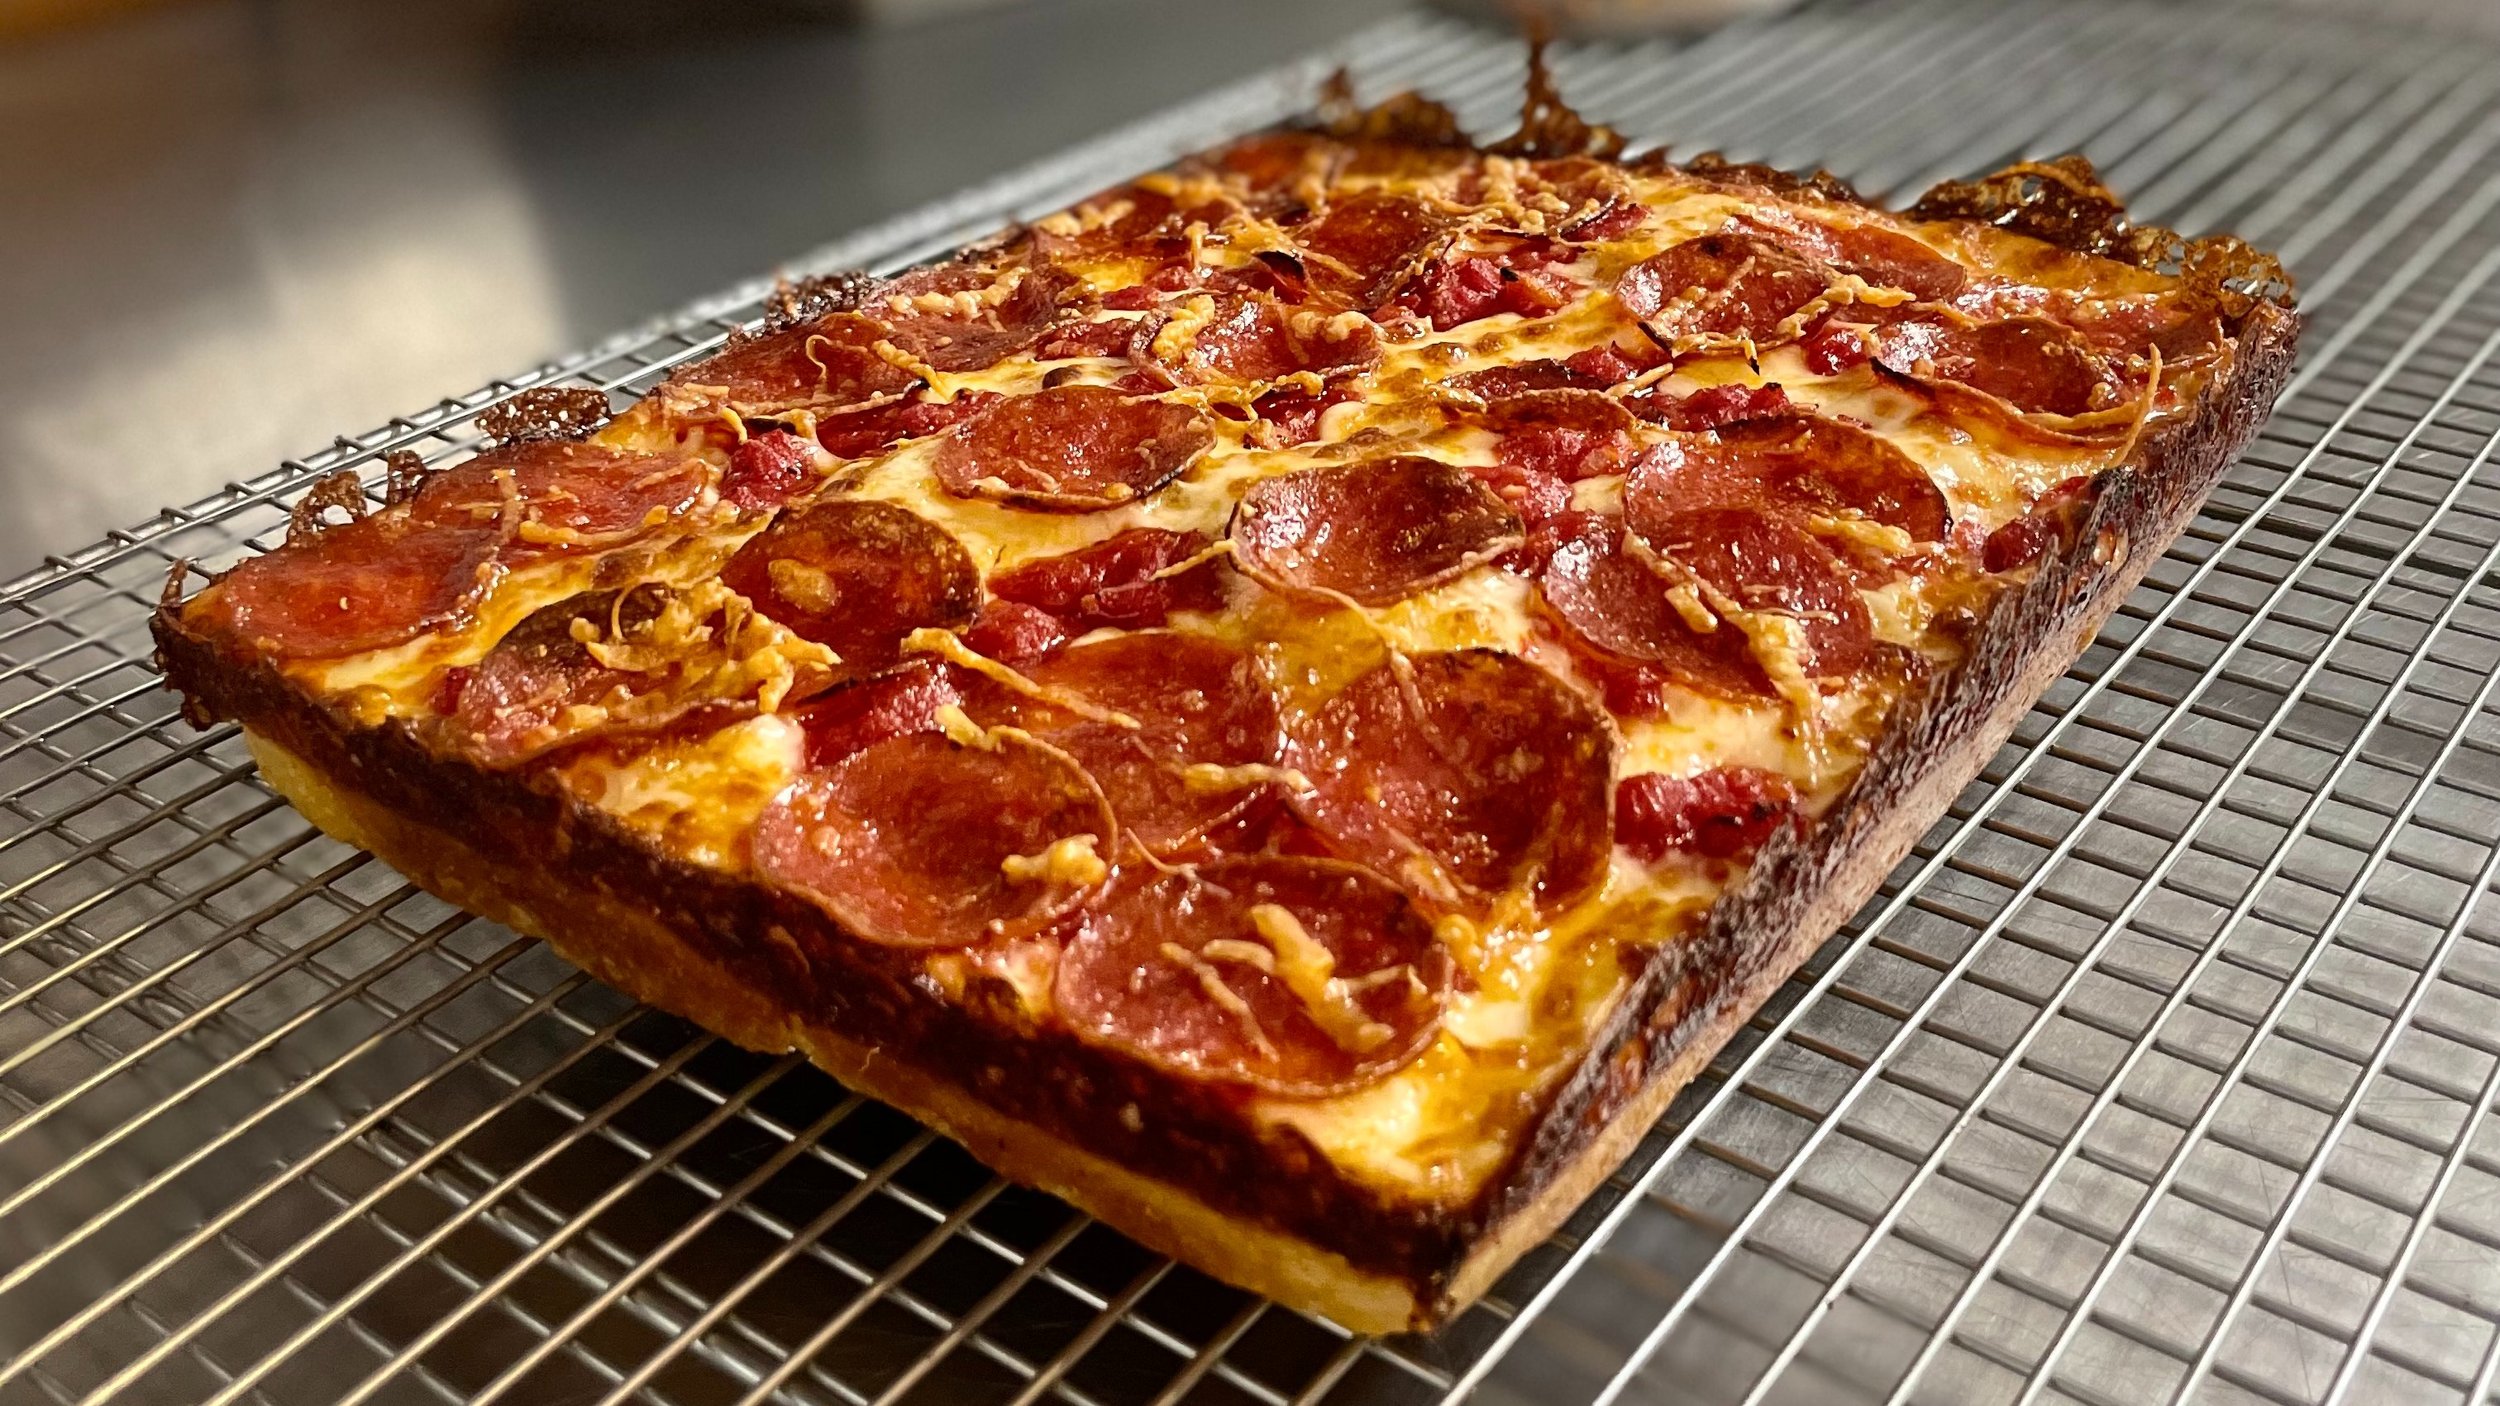 The Specialized Pan That Gives Detroit-Style Pizza Its Signature